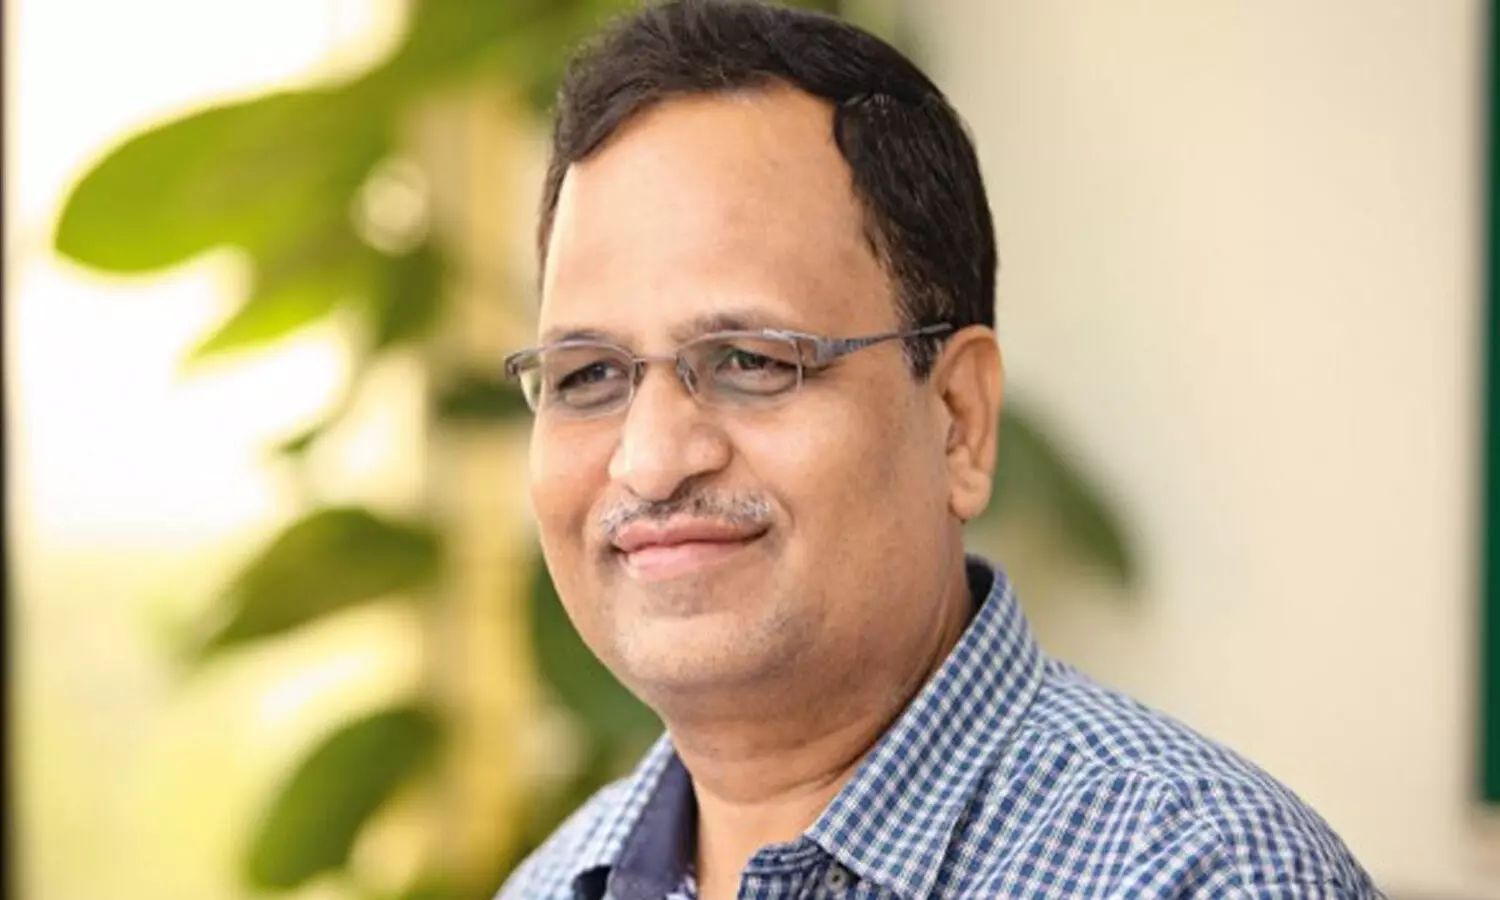 COVID-19 Beds increased By 1,000, 500 each in Govt, private hospitals: Delhi Health Minister Satyendra Jain